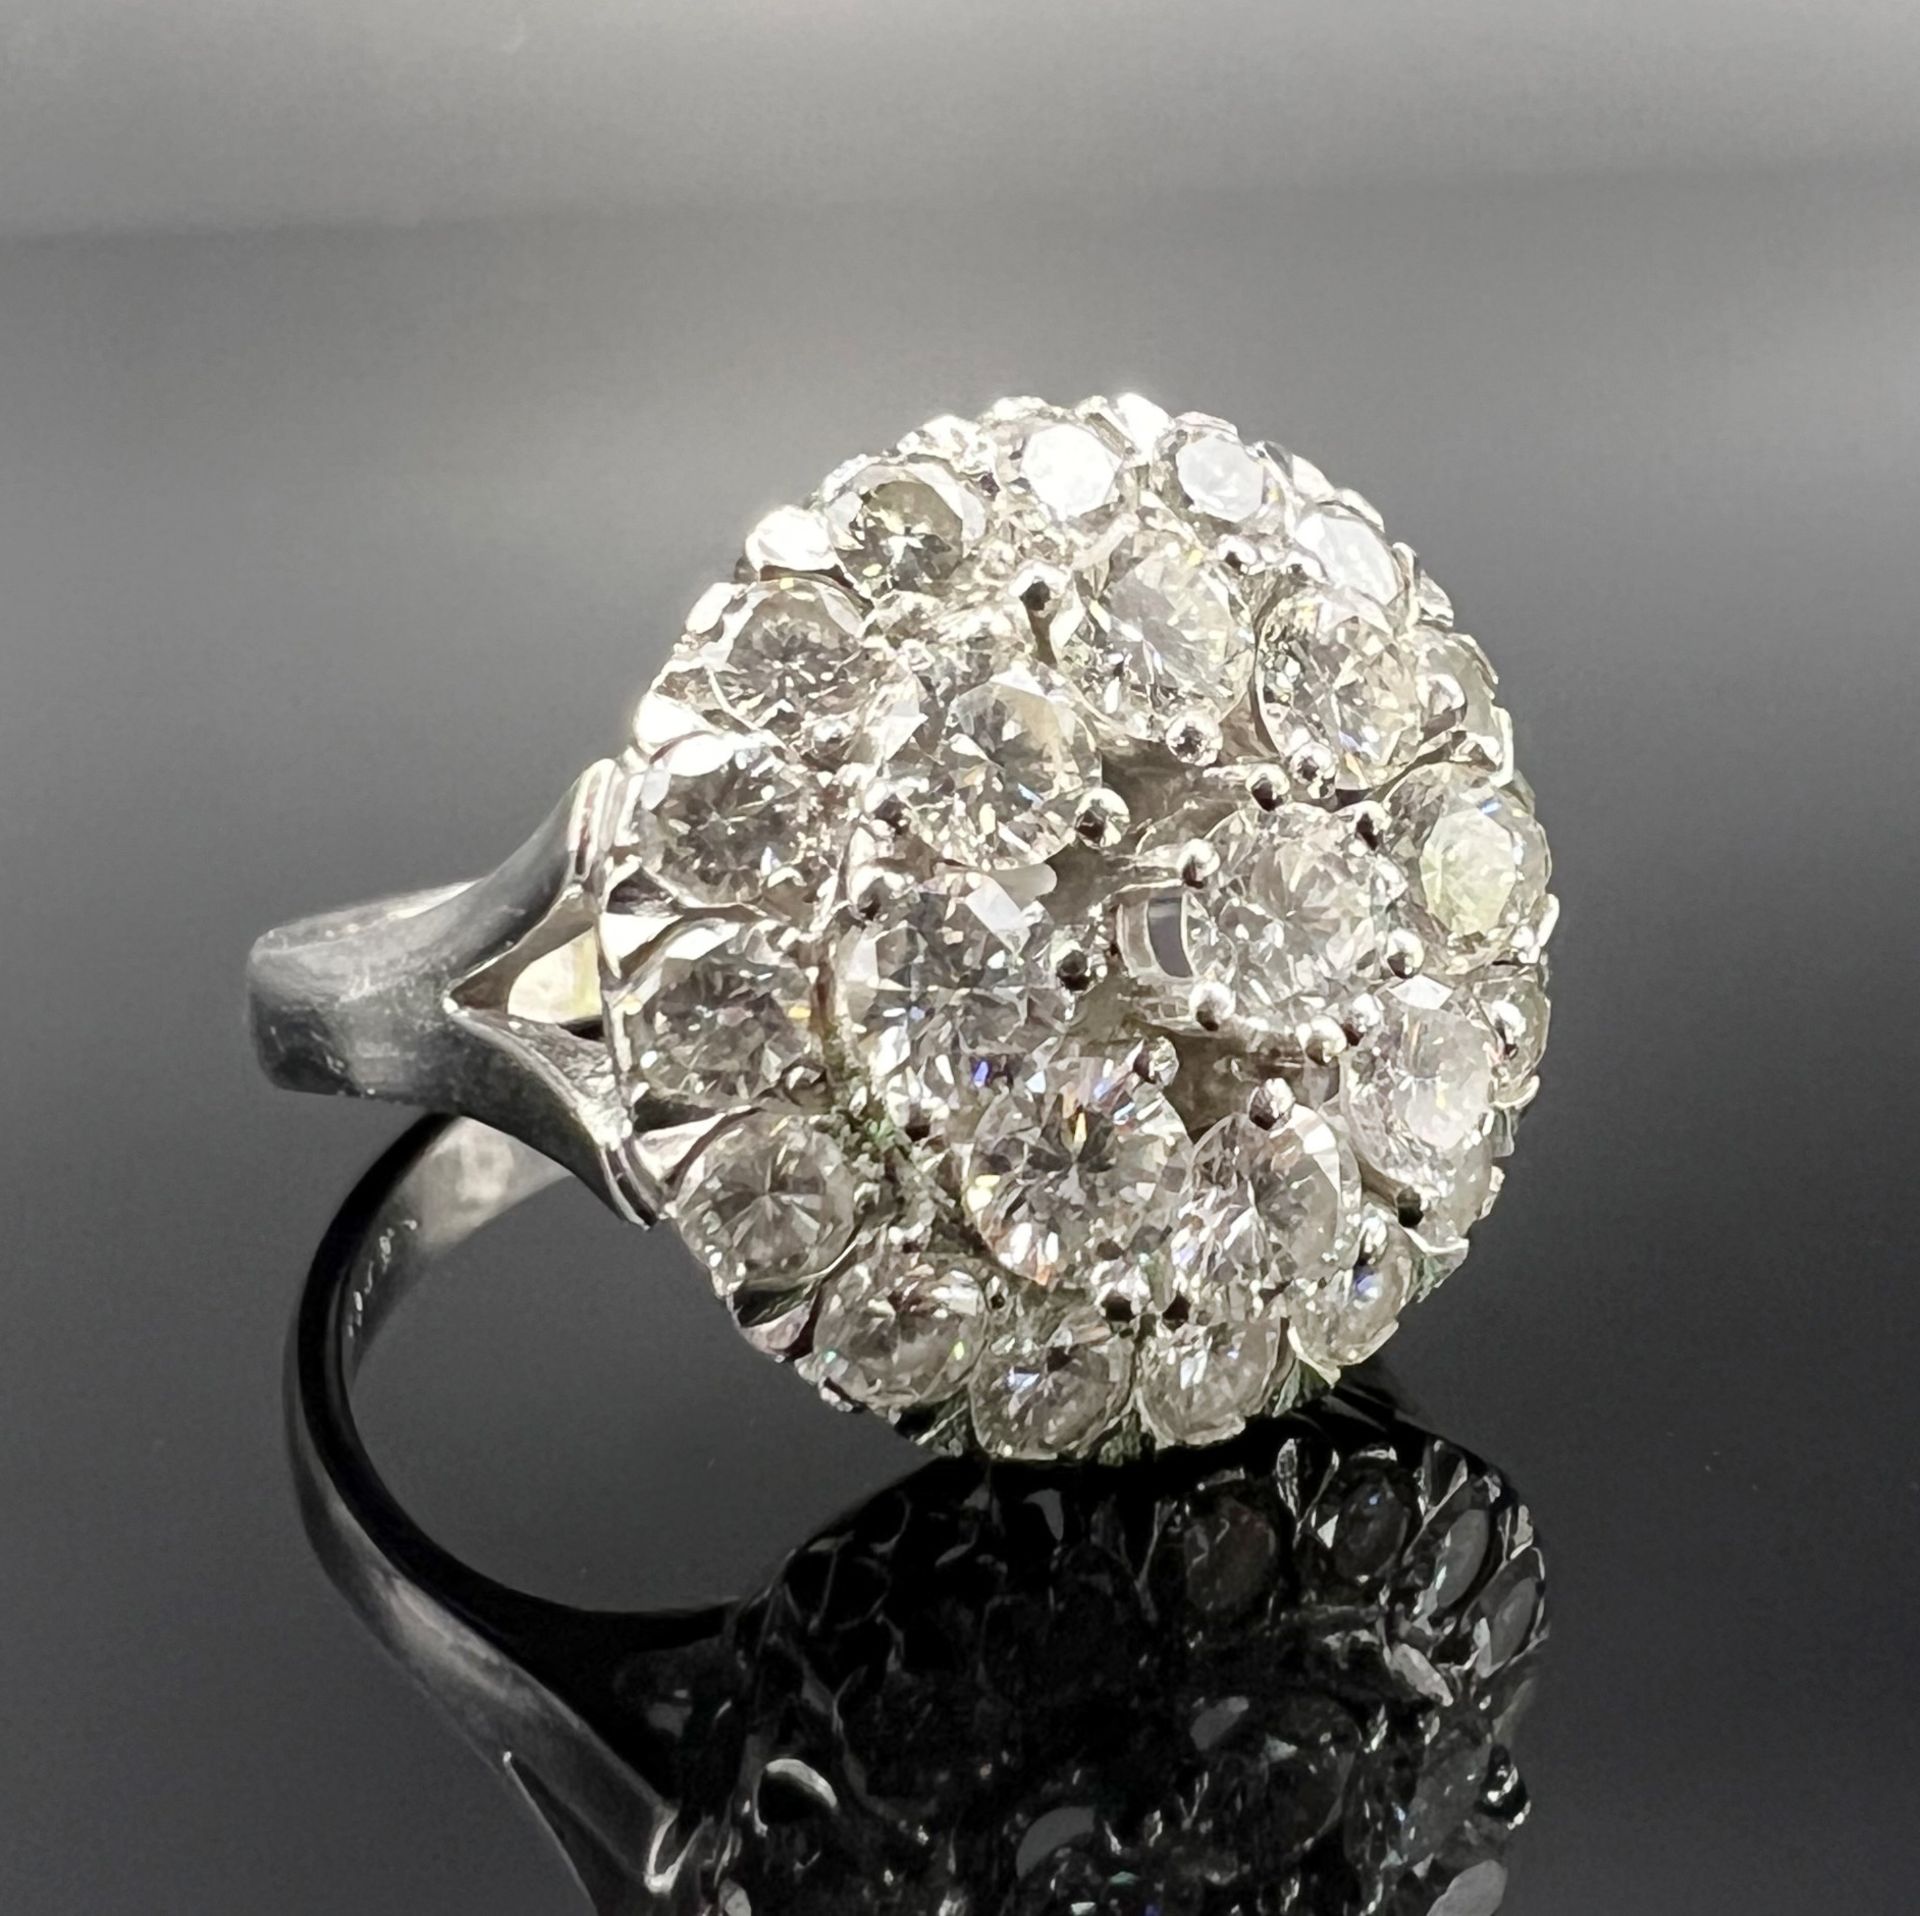 Ladies' ring 585 white gold with 25 diamonds. - Image 3 of 11